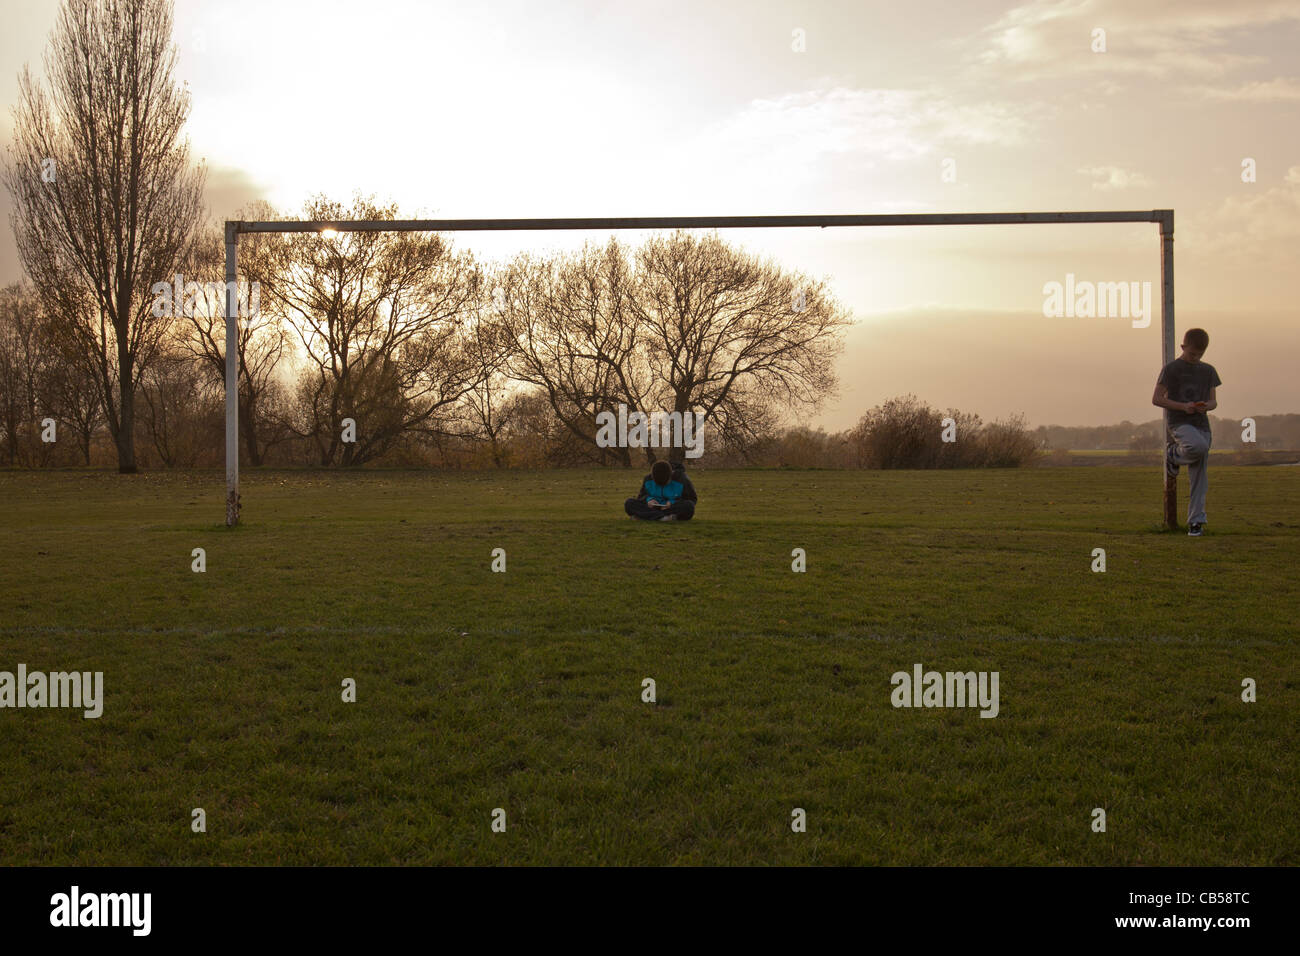 Kids of today. Two children playing on their phones in an empty goal post. Stock Photo